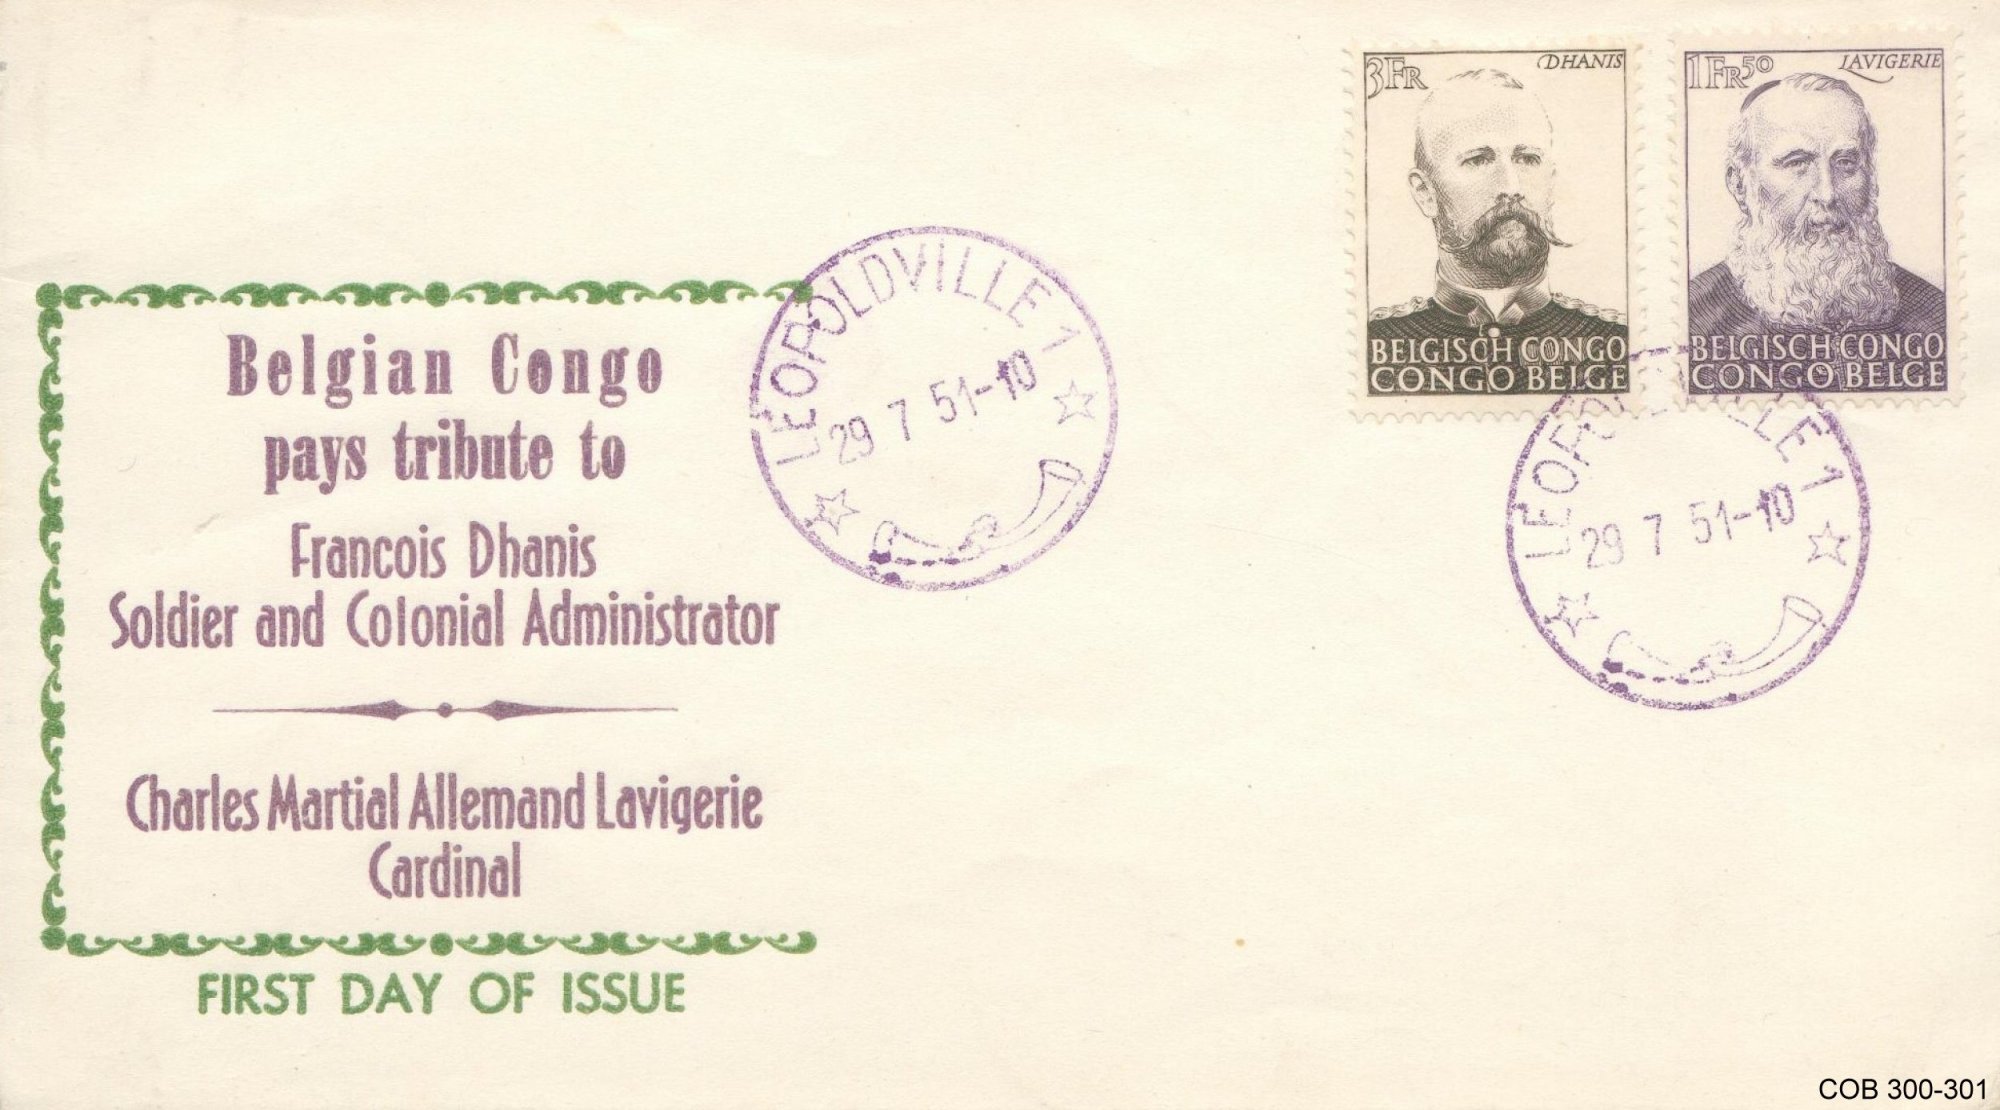 FDC_300-301